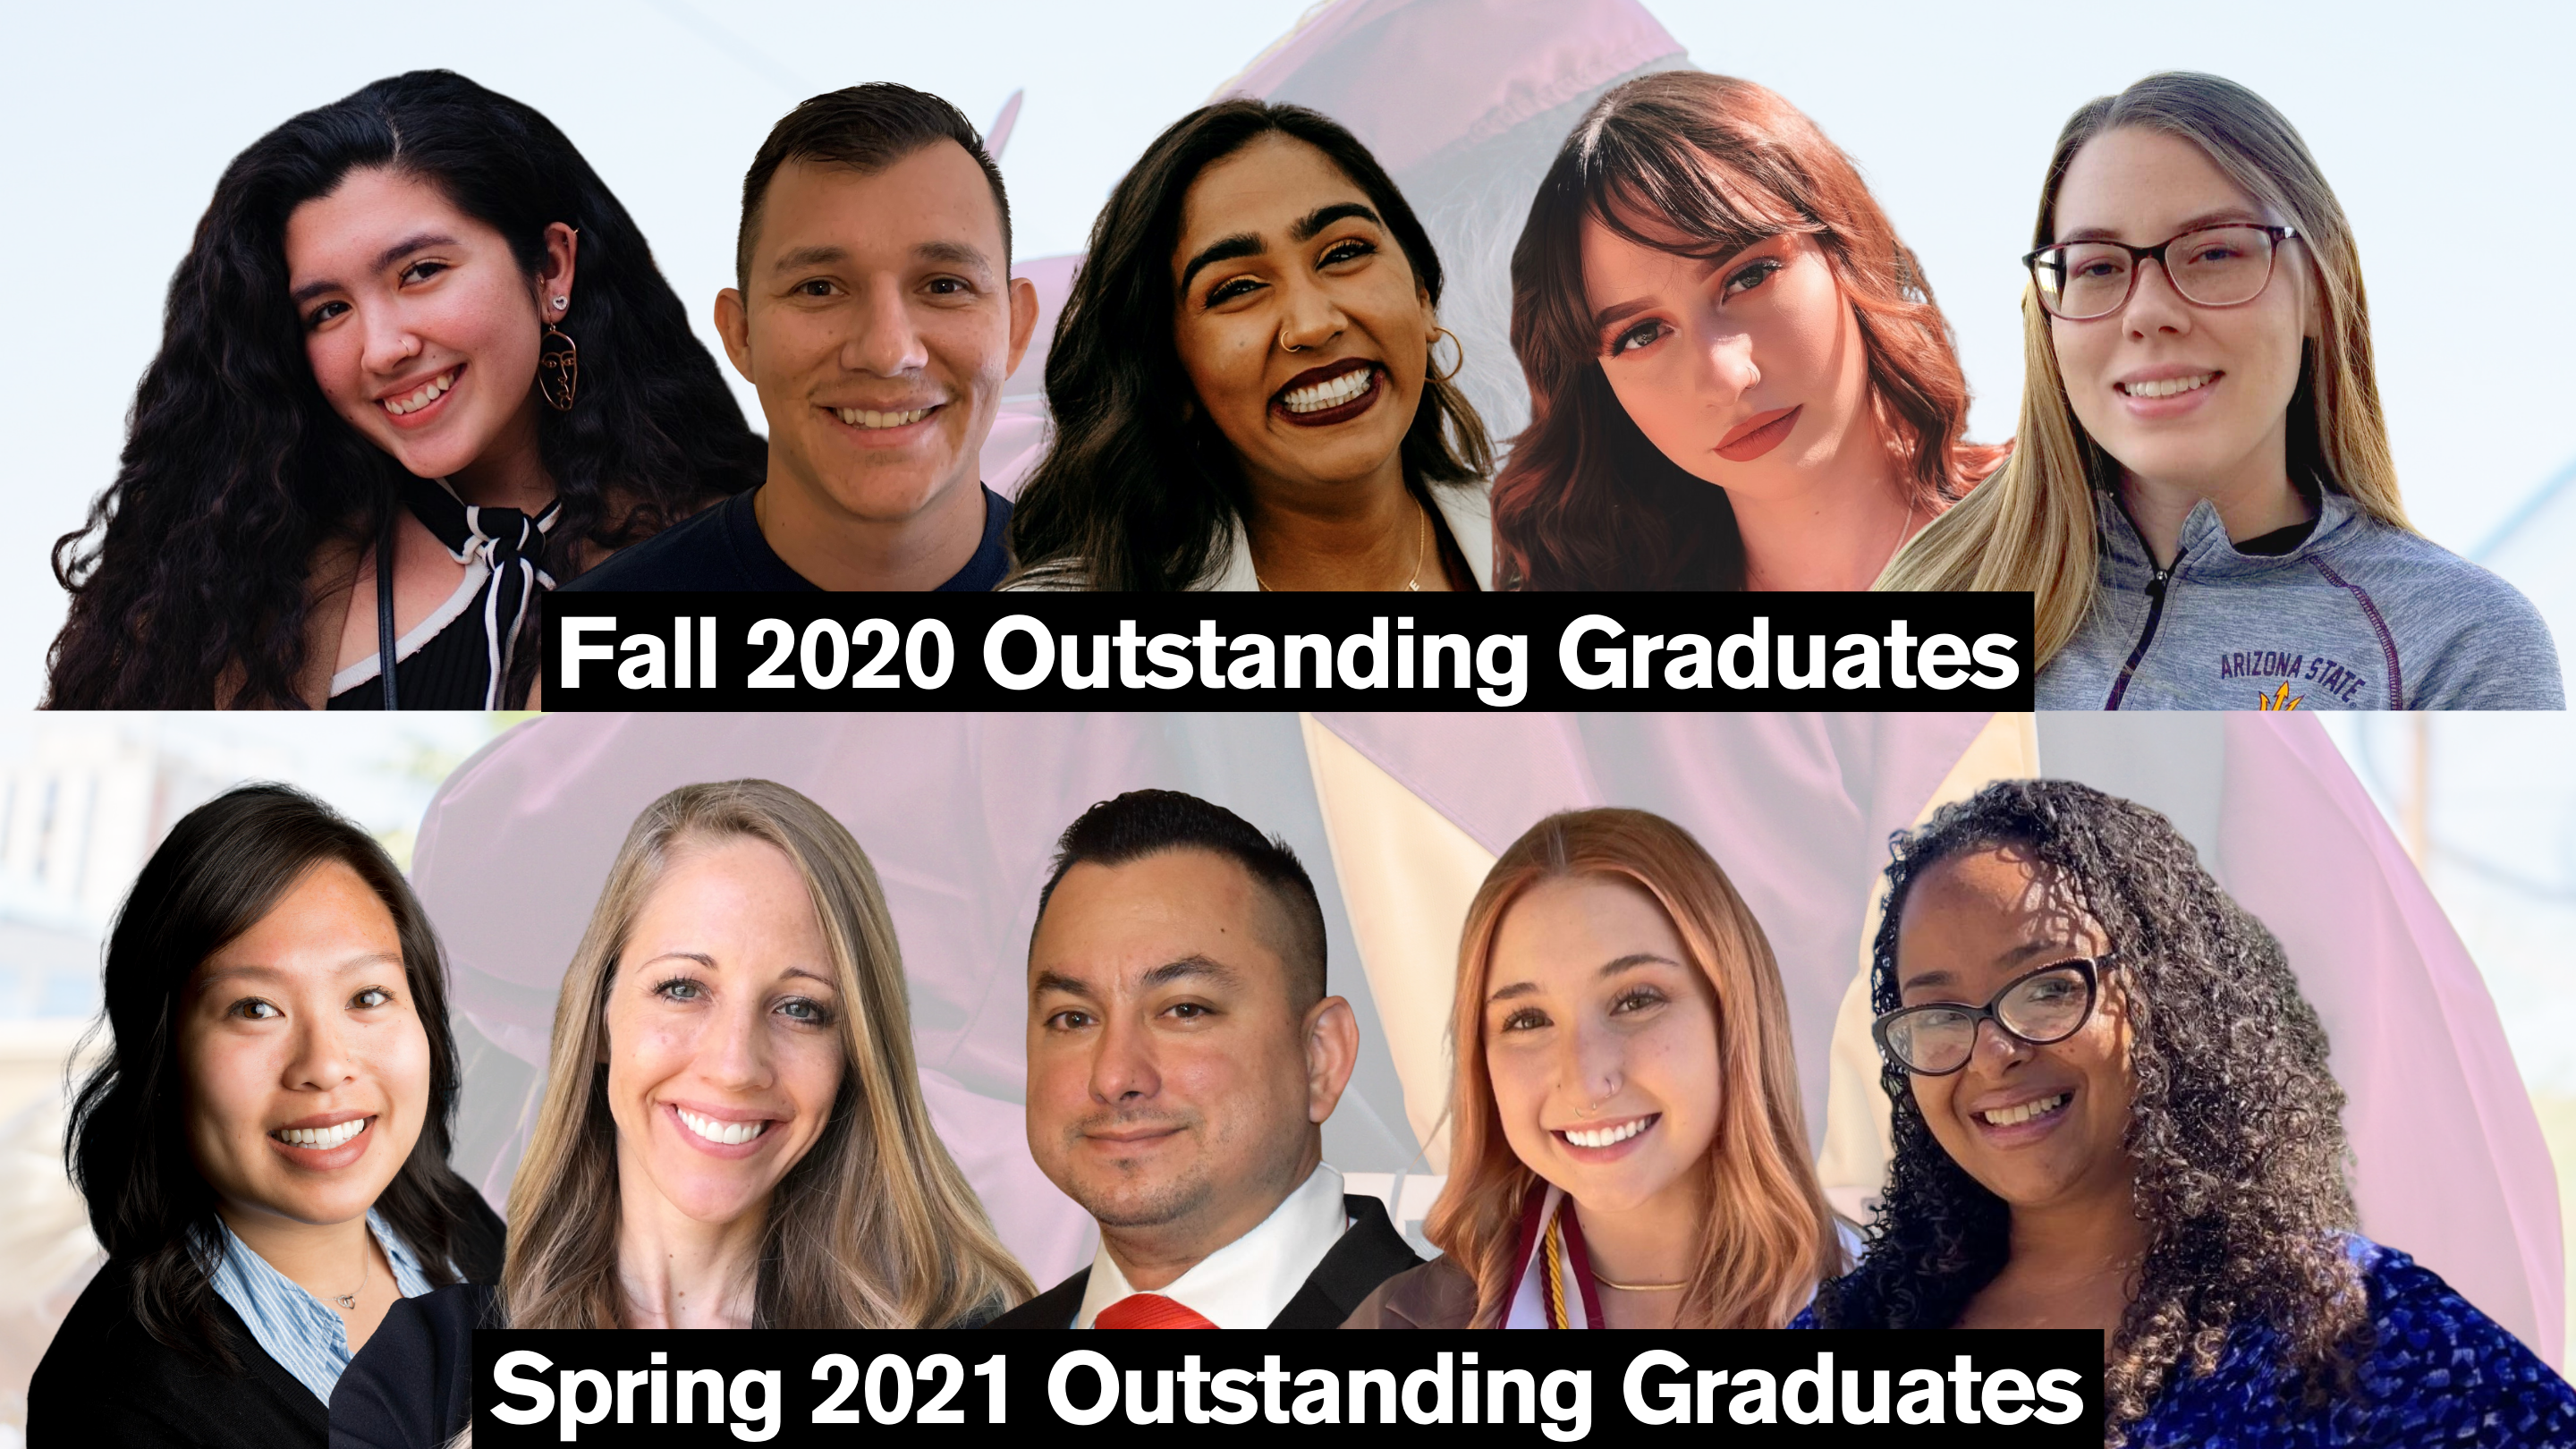 Compilation image with the five Fall 2020 outstanding graduates on the top half and the five spring 2021 graduates on the bottom half